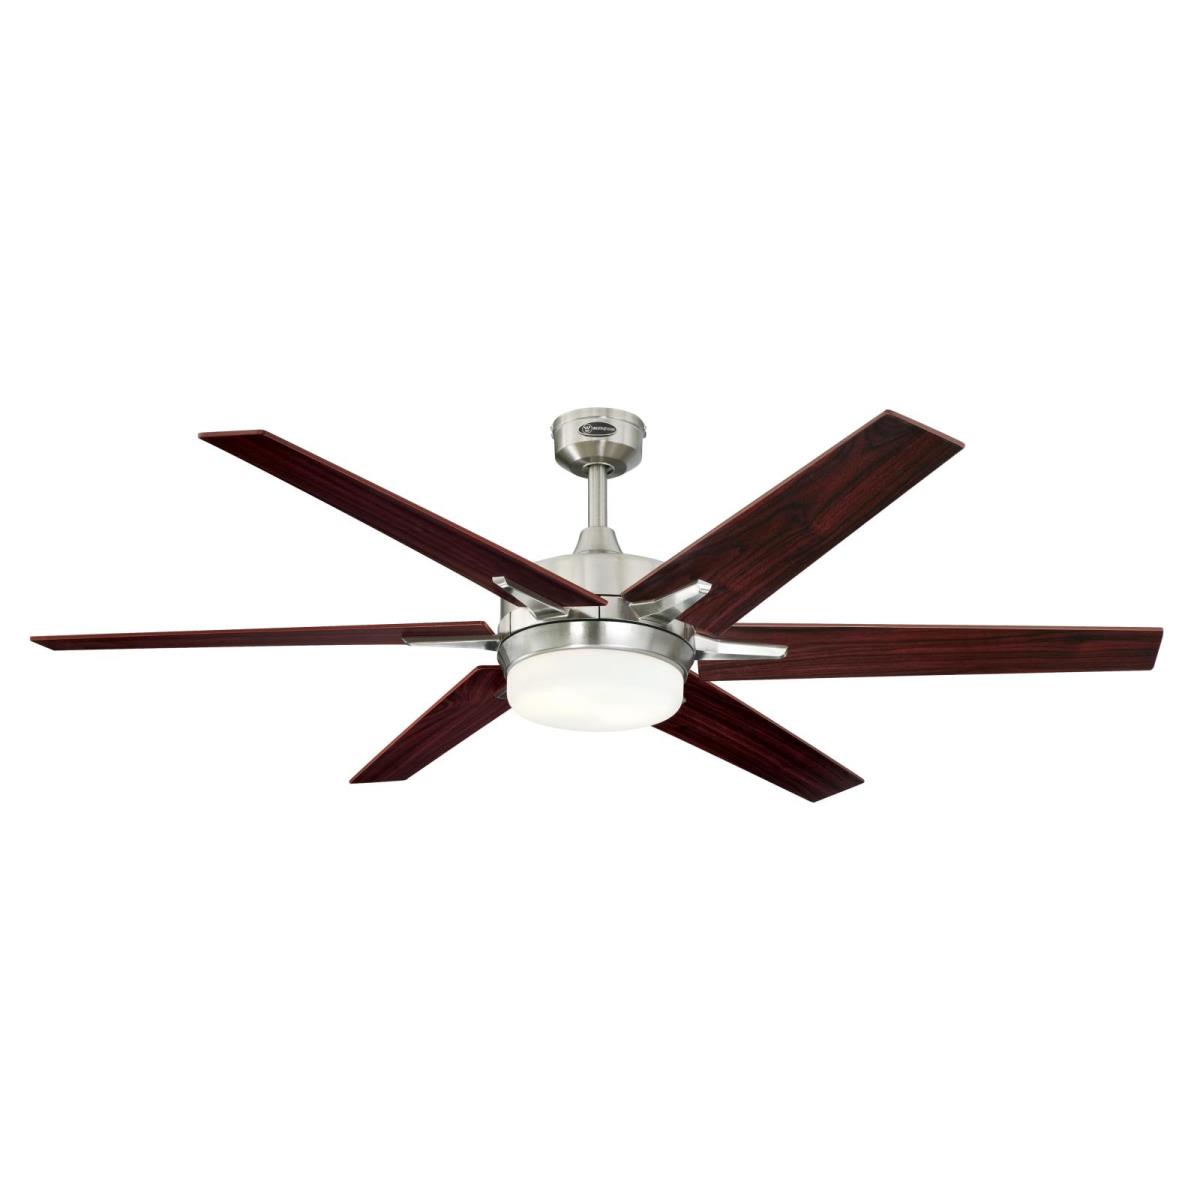 60" Brushed Nickel Finish Reversible Blades (Rosewood/Light Maple) Includes Light Kit with Opal Frosted Glass